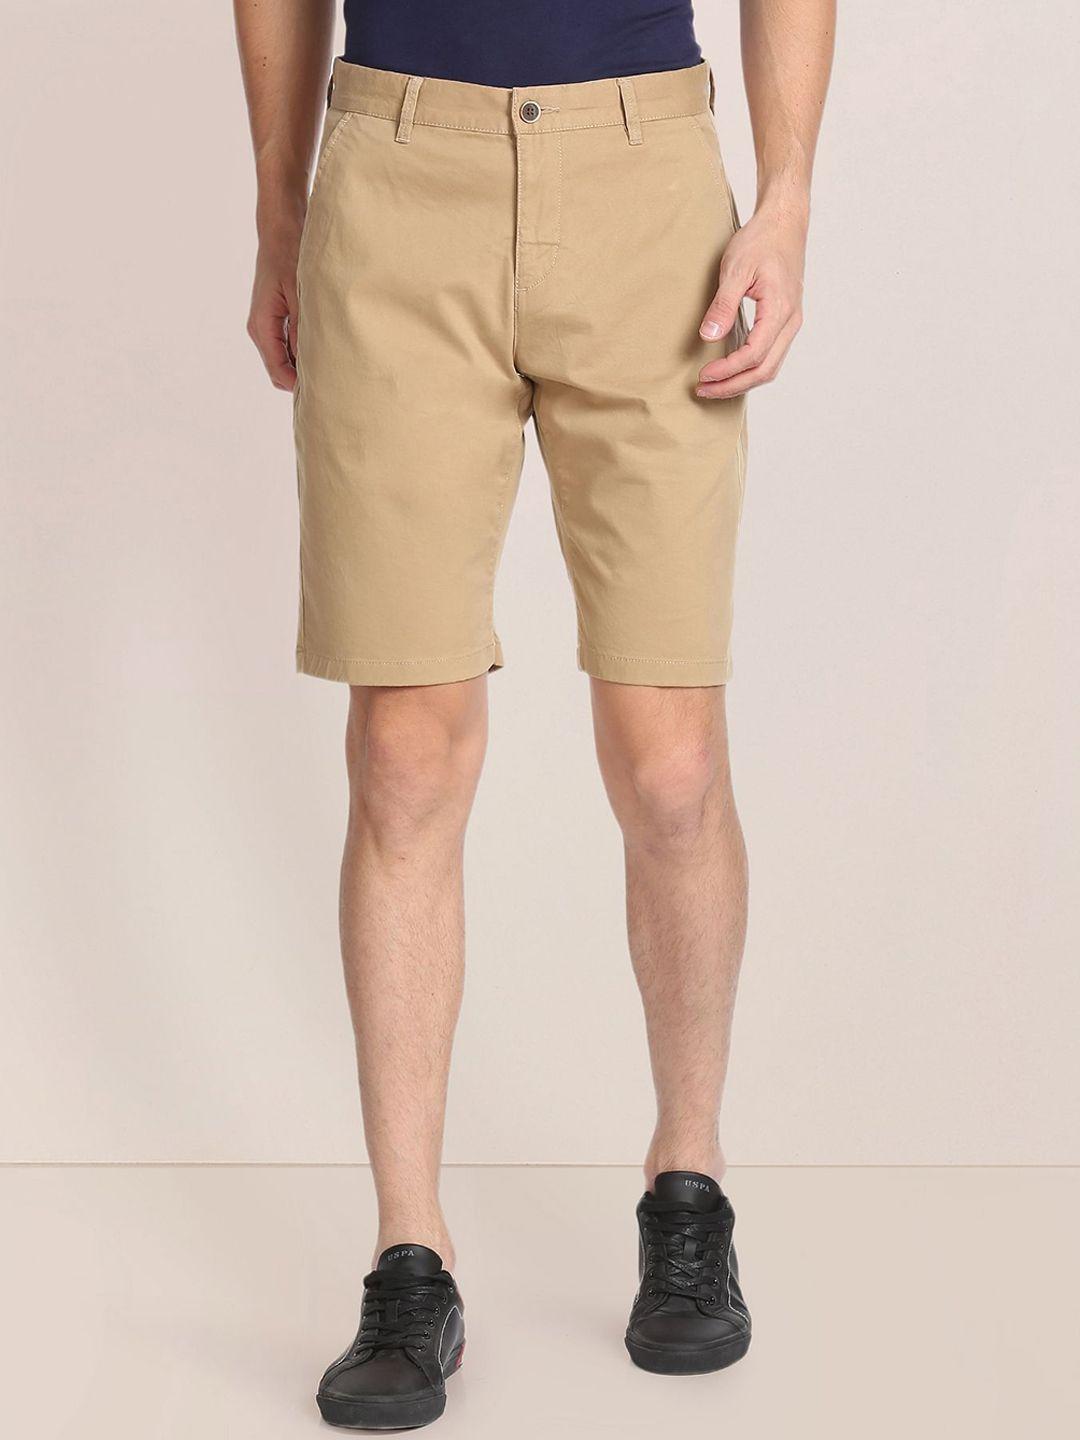 u.s. polo assn. men slim fit mid-rise chino shorts